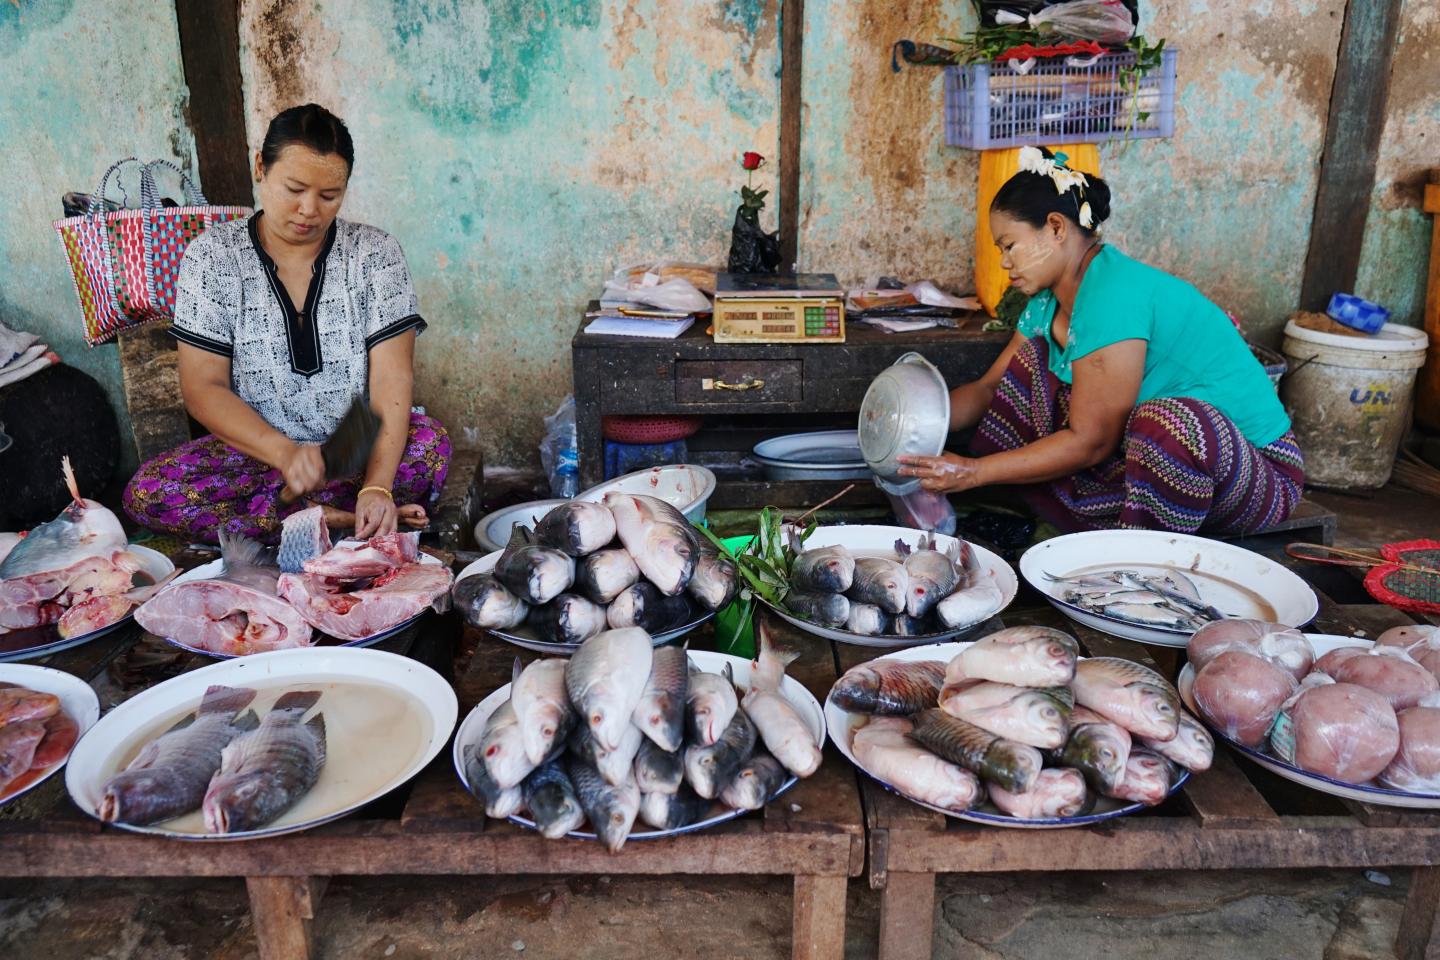 A Steady Supply of Fish Is Essential to Support Local Jobs, Food Sovereignty, and Human Well-Being